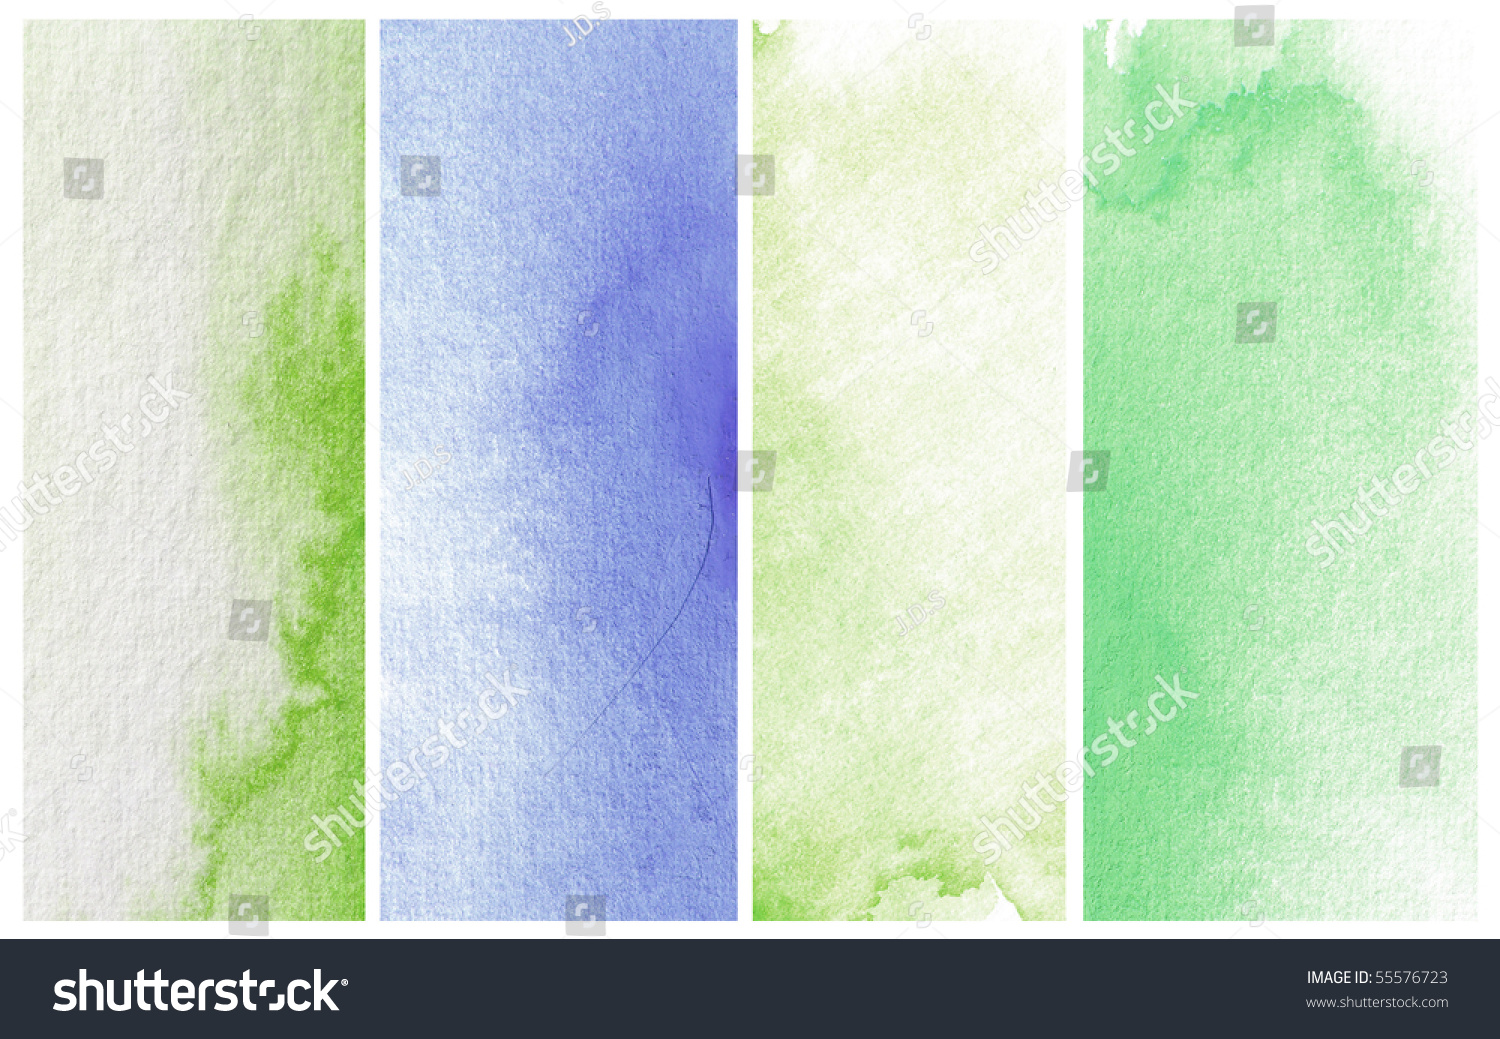 Abstract Watercolor Background Design Banners Stock Photo 55576723